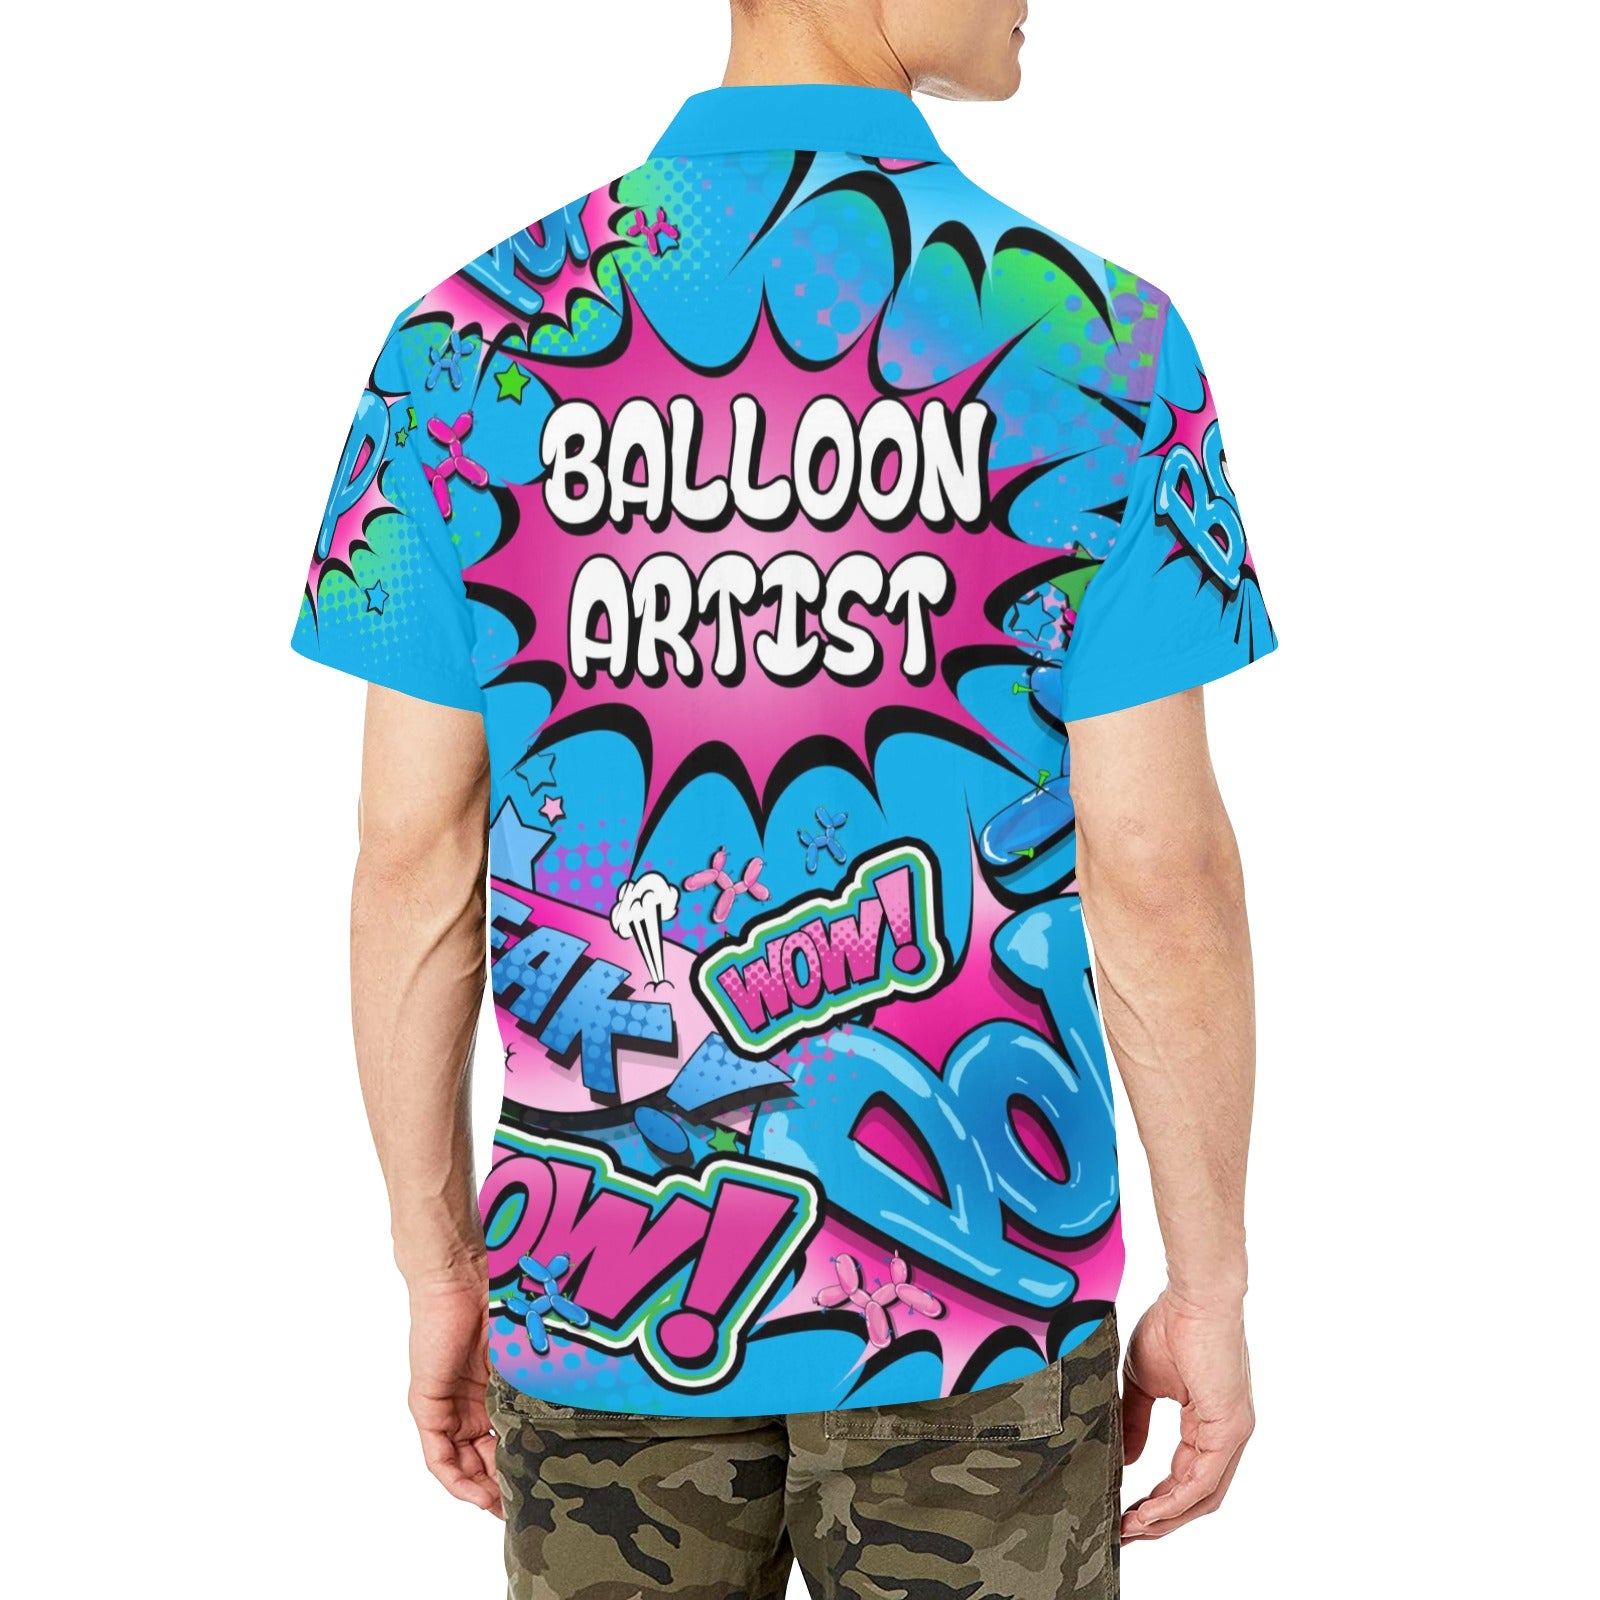 Balloon Twisting party shirt with balloon dogs and chest pocket